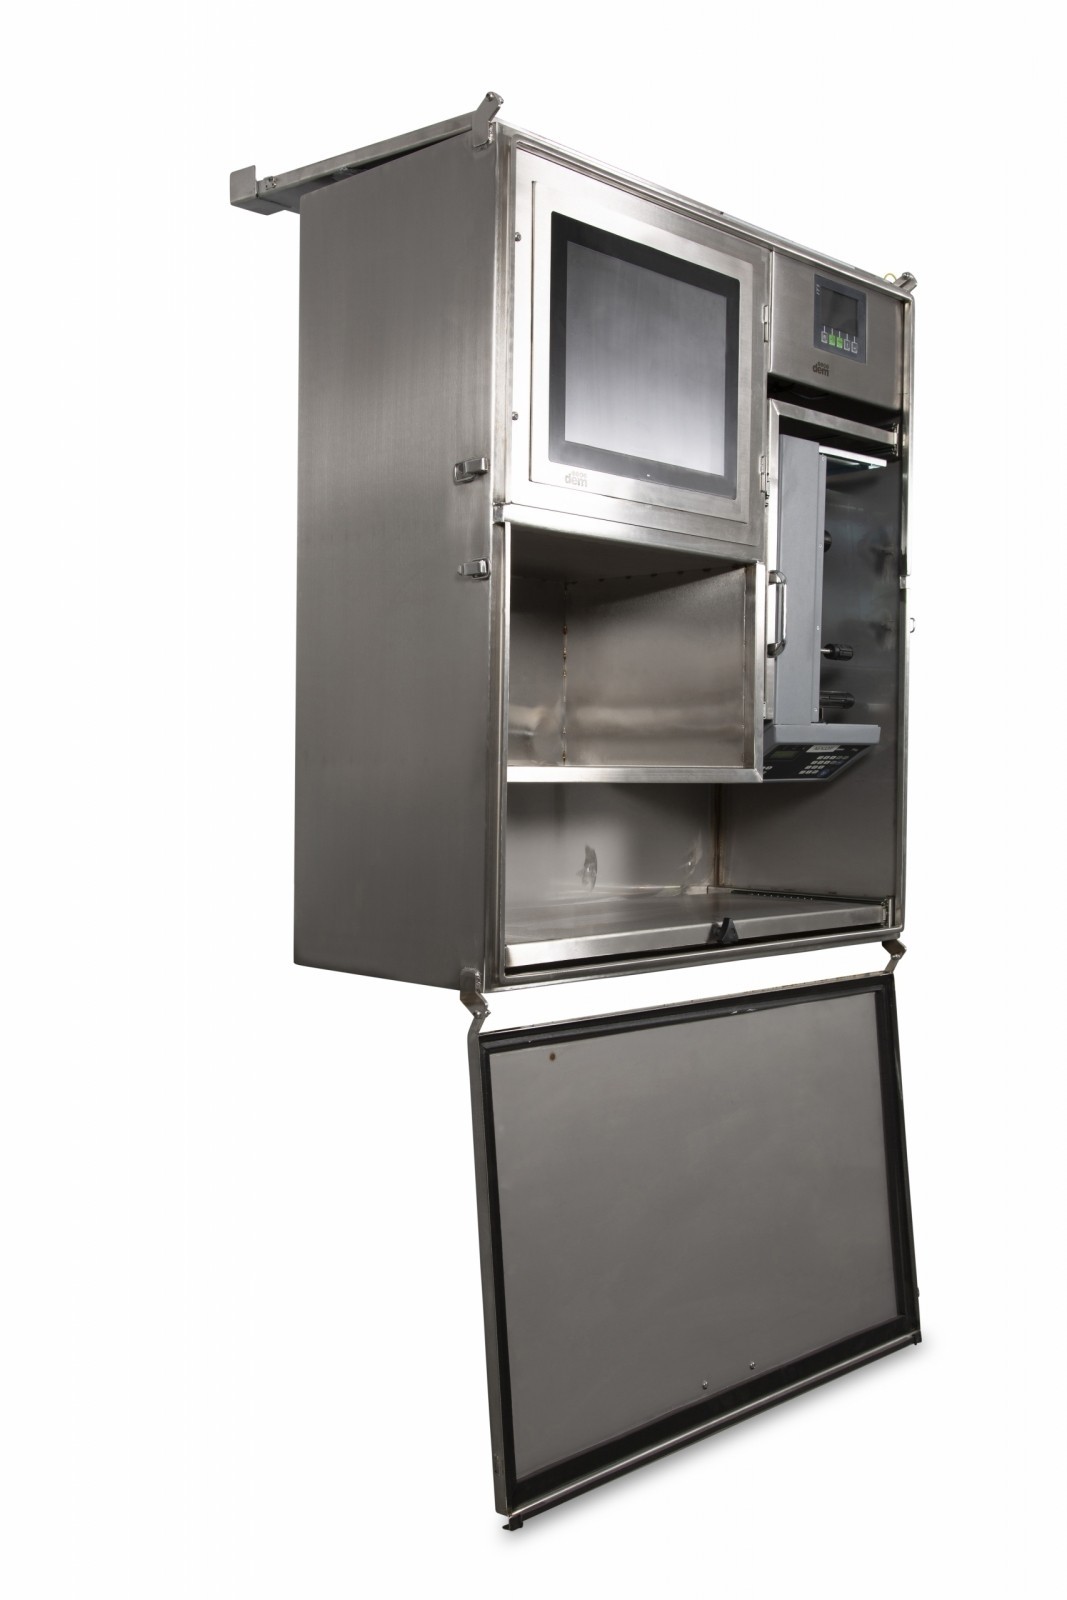 Wall mounted stainless steel cabinet dem machines